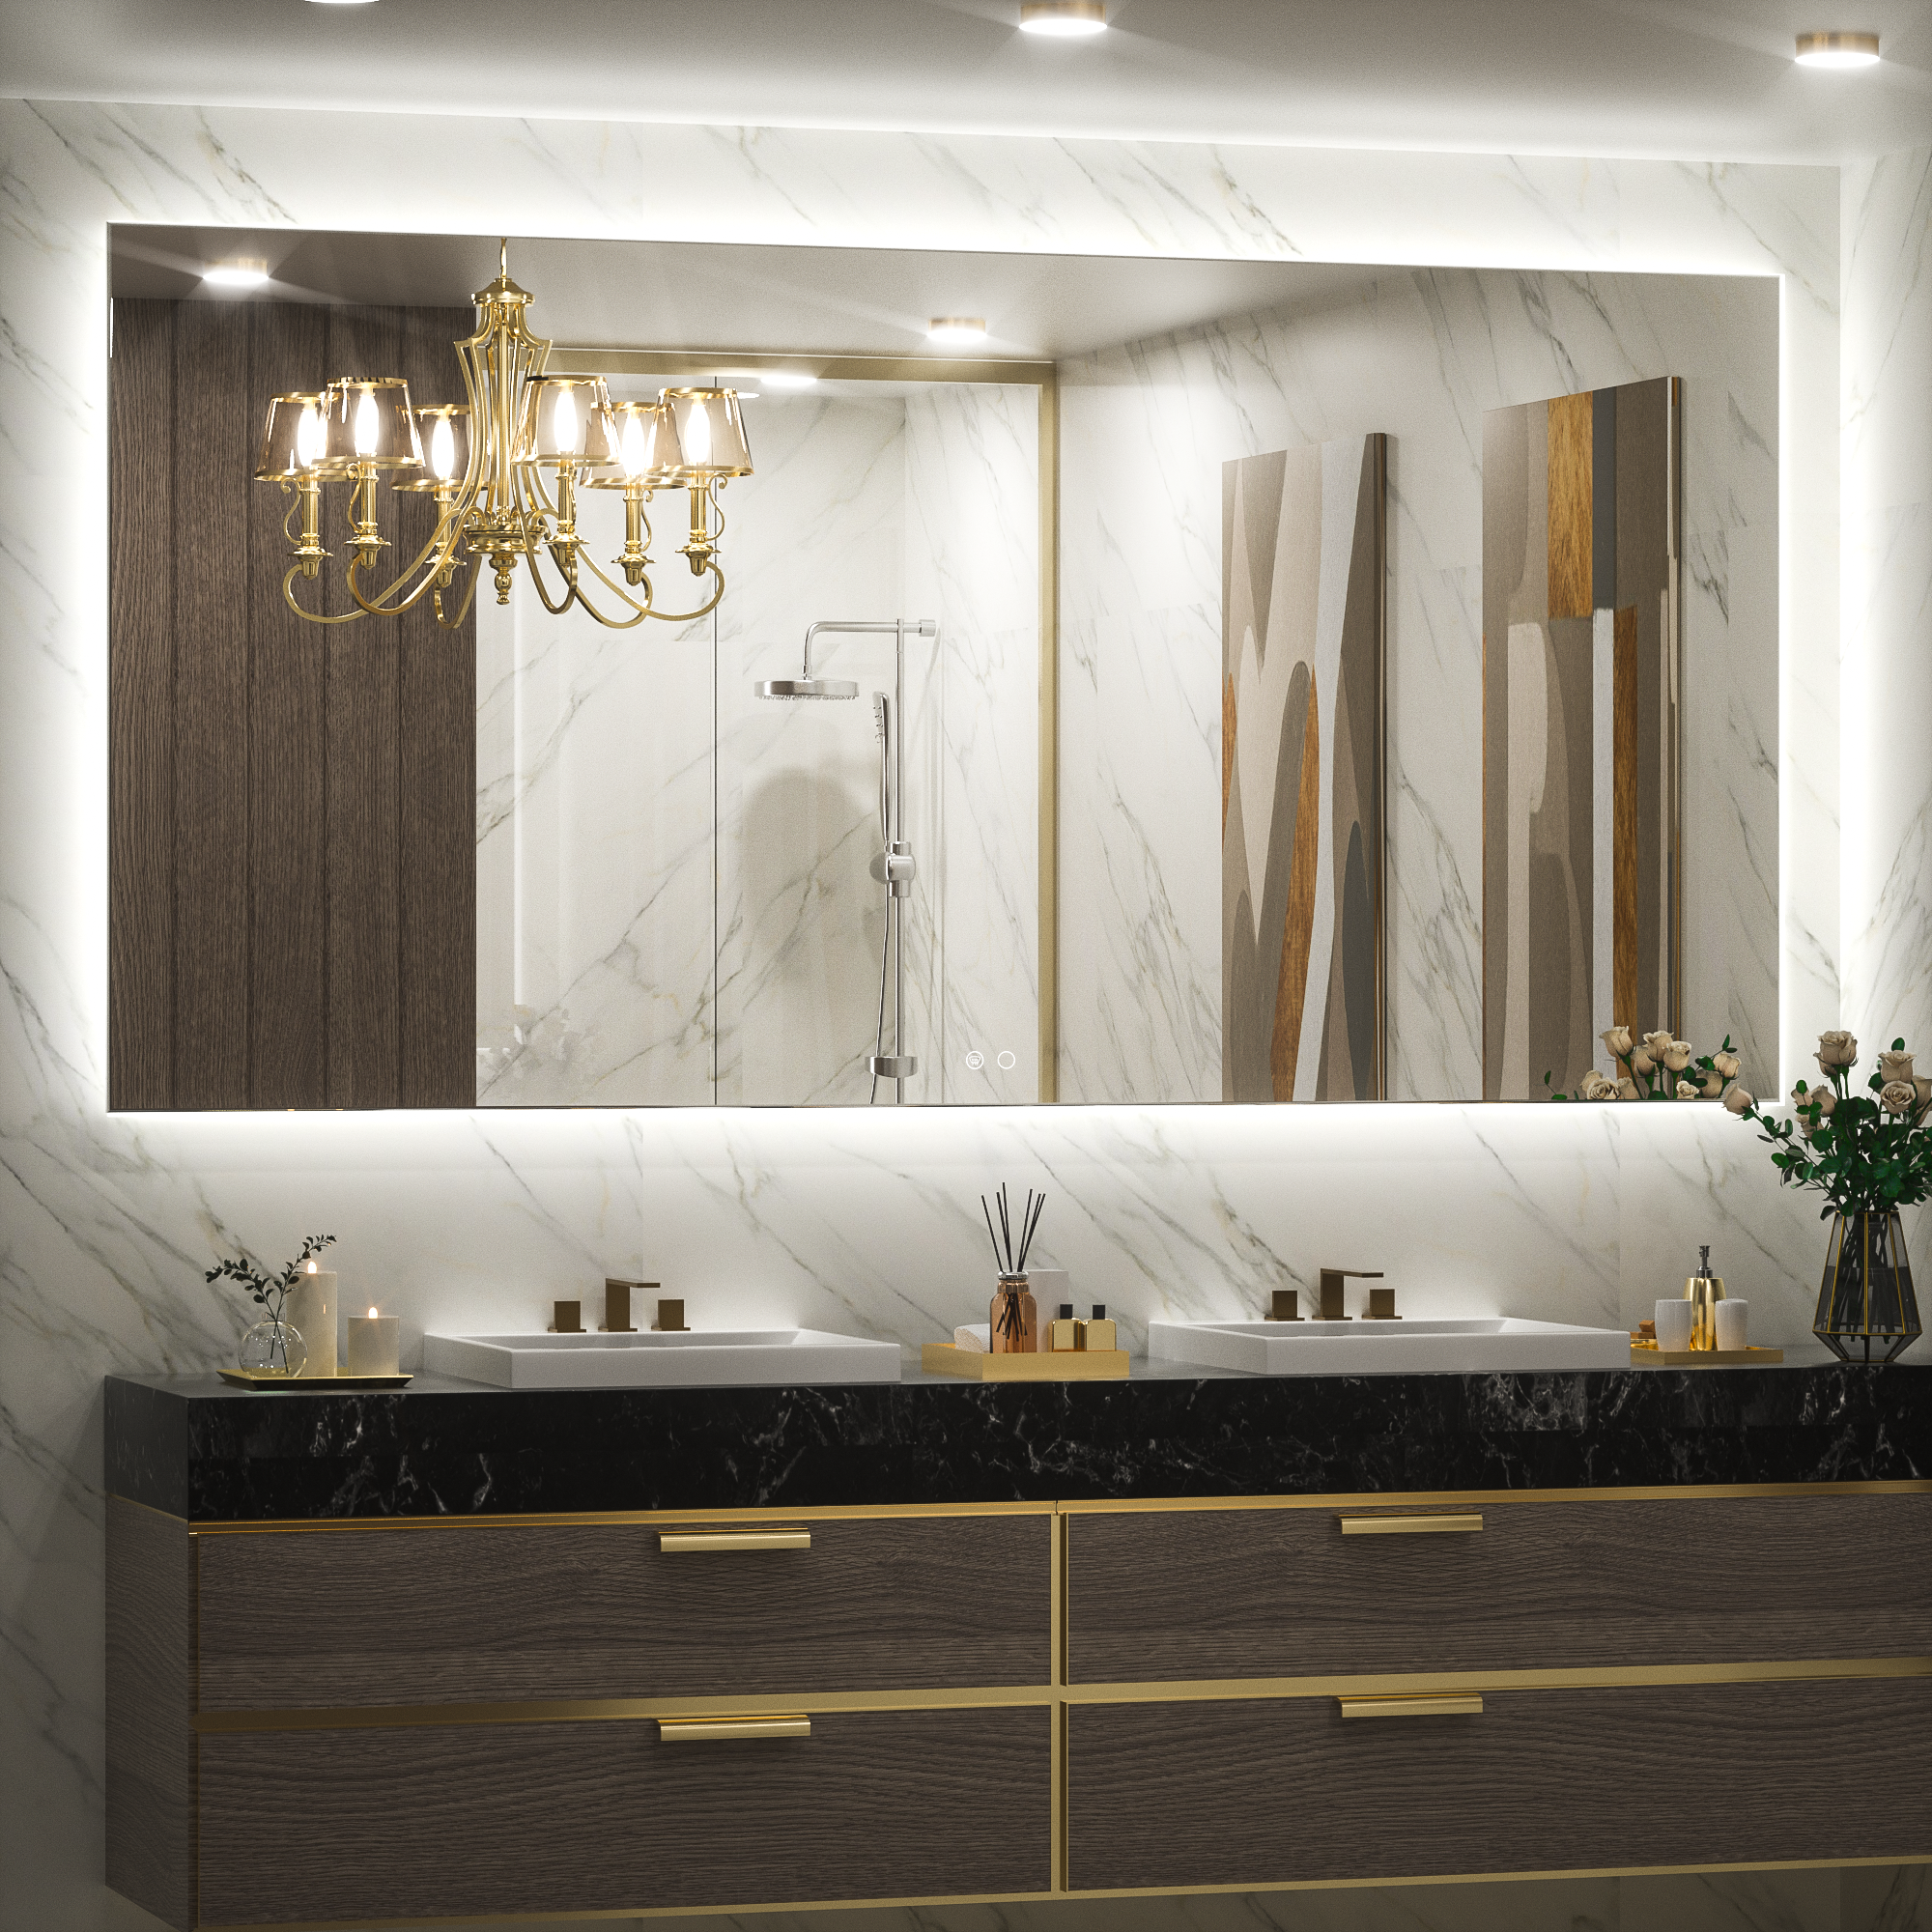 LED Backlit oversized two sinks mirrors